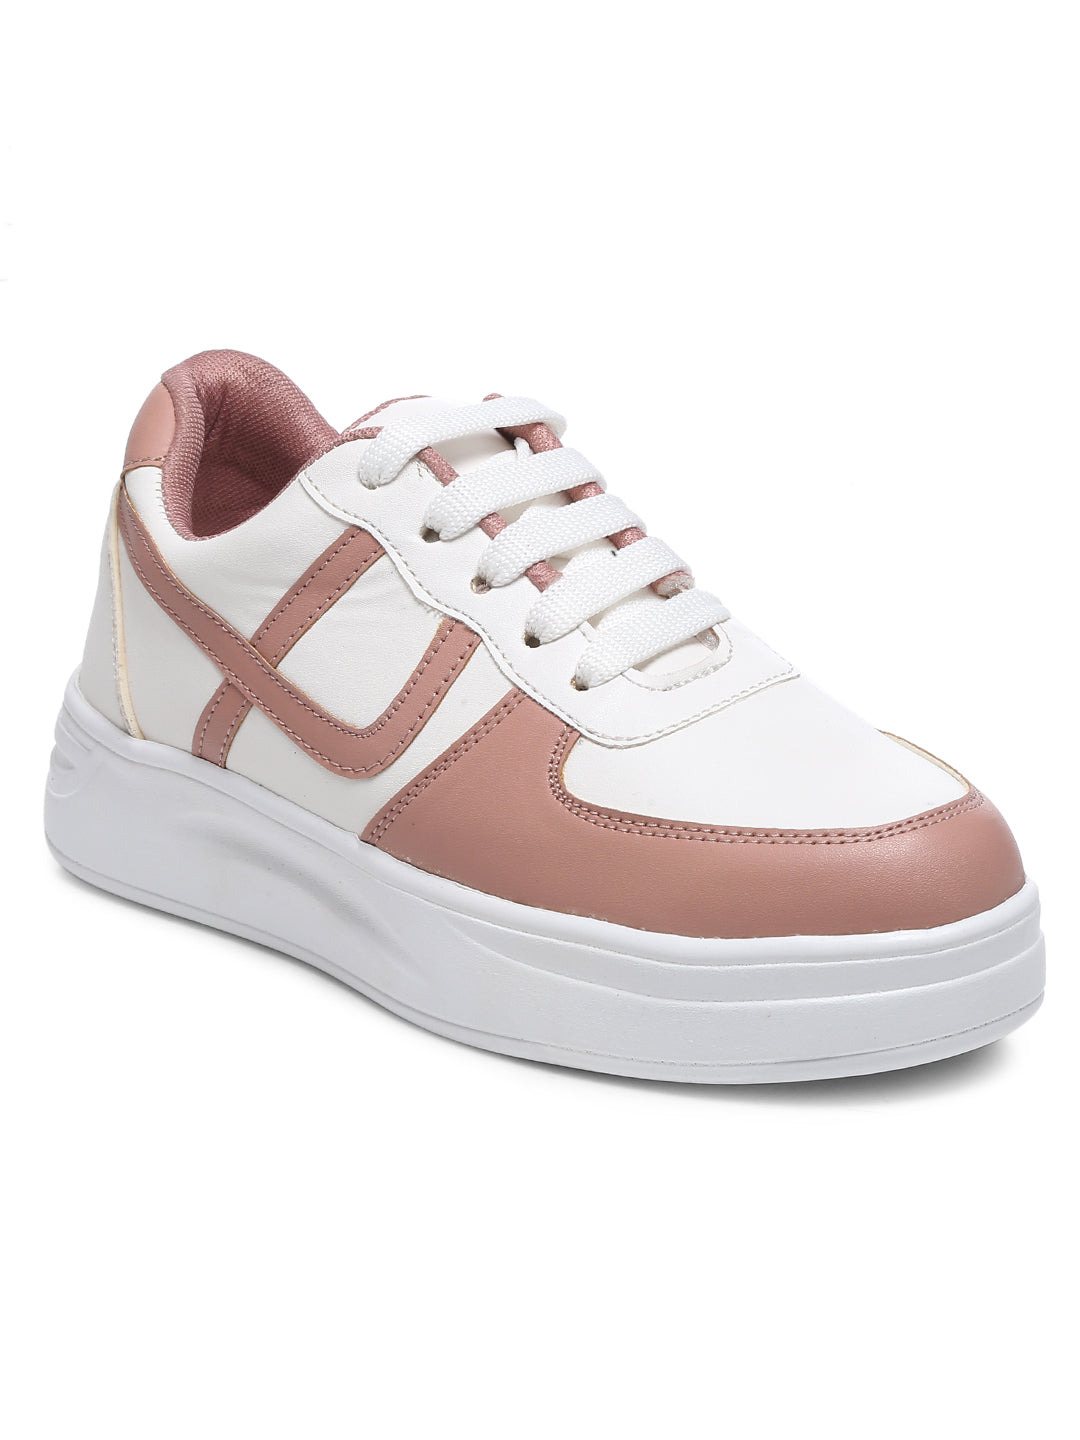 GNIST White Nude Colour Blocked Sneakers